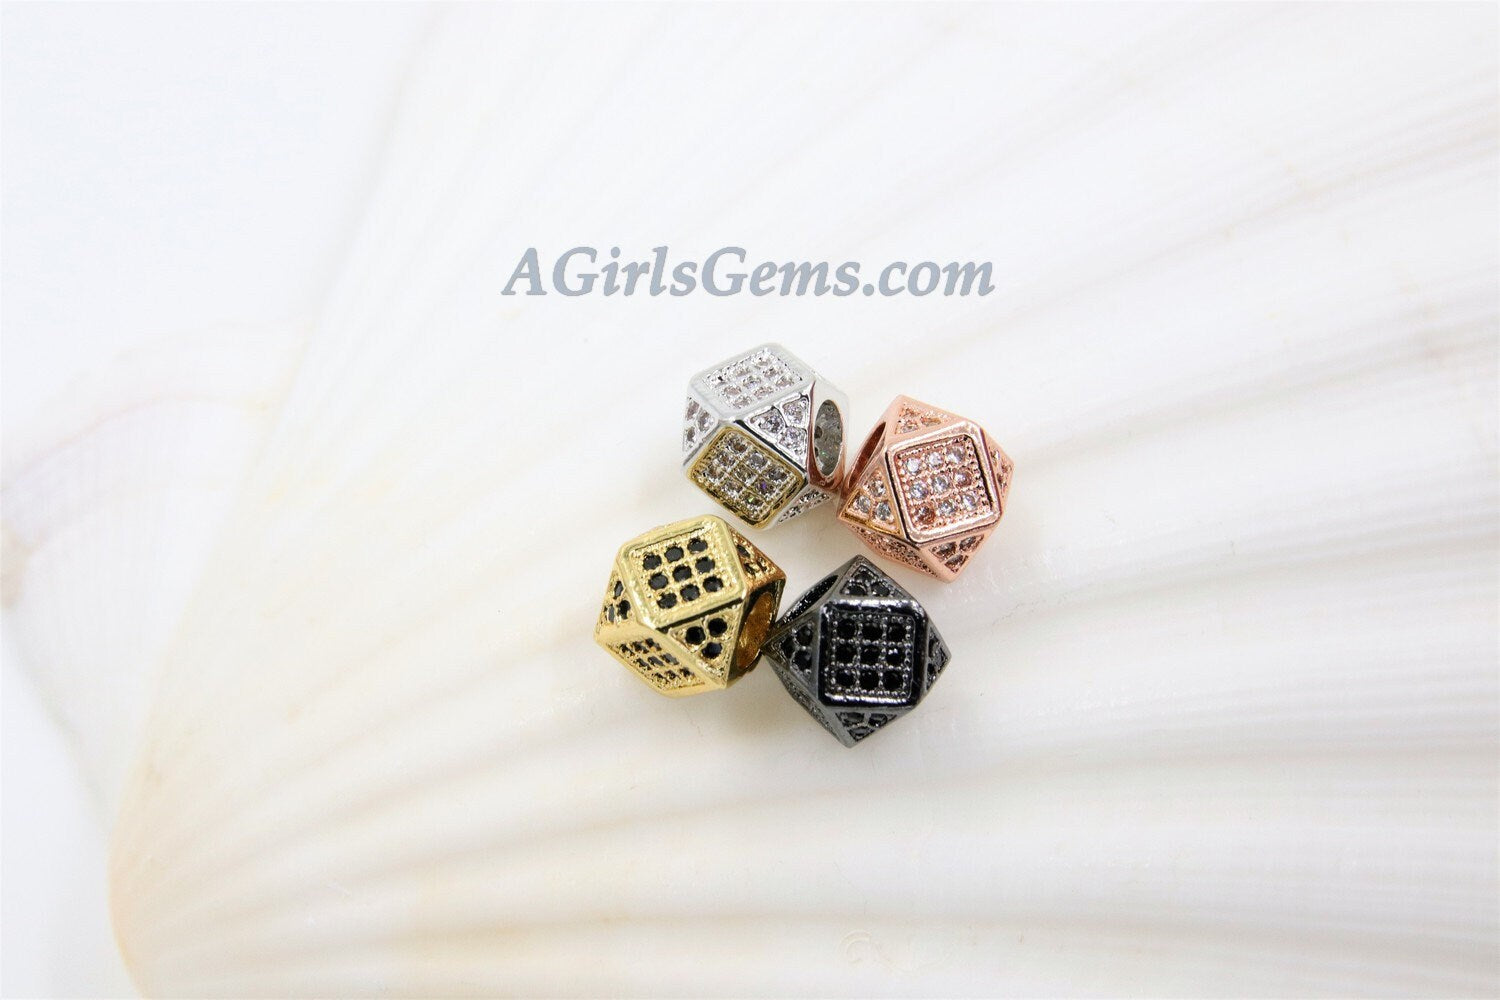 CZ Cube Beads, Cubic Zirconia Large Hole Beads #303, Pave Hexagon Square